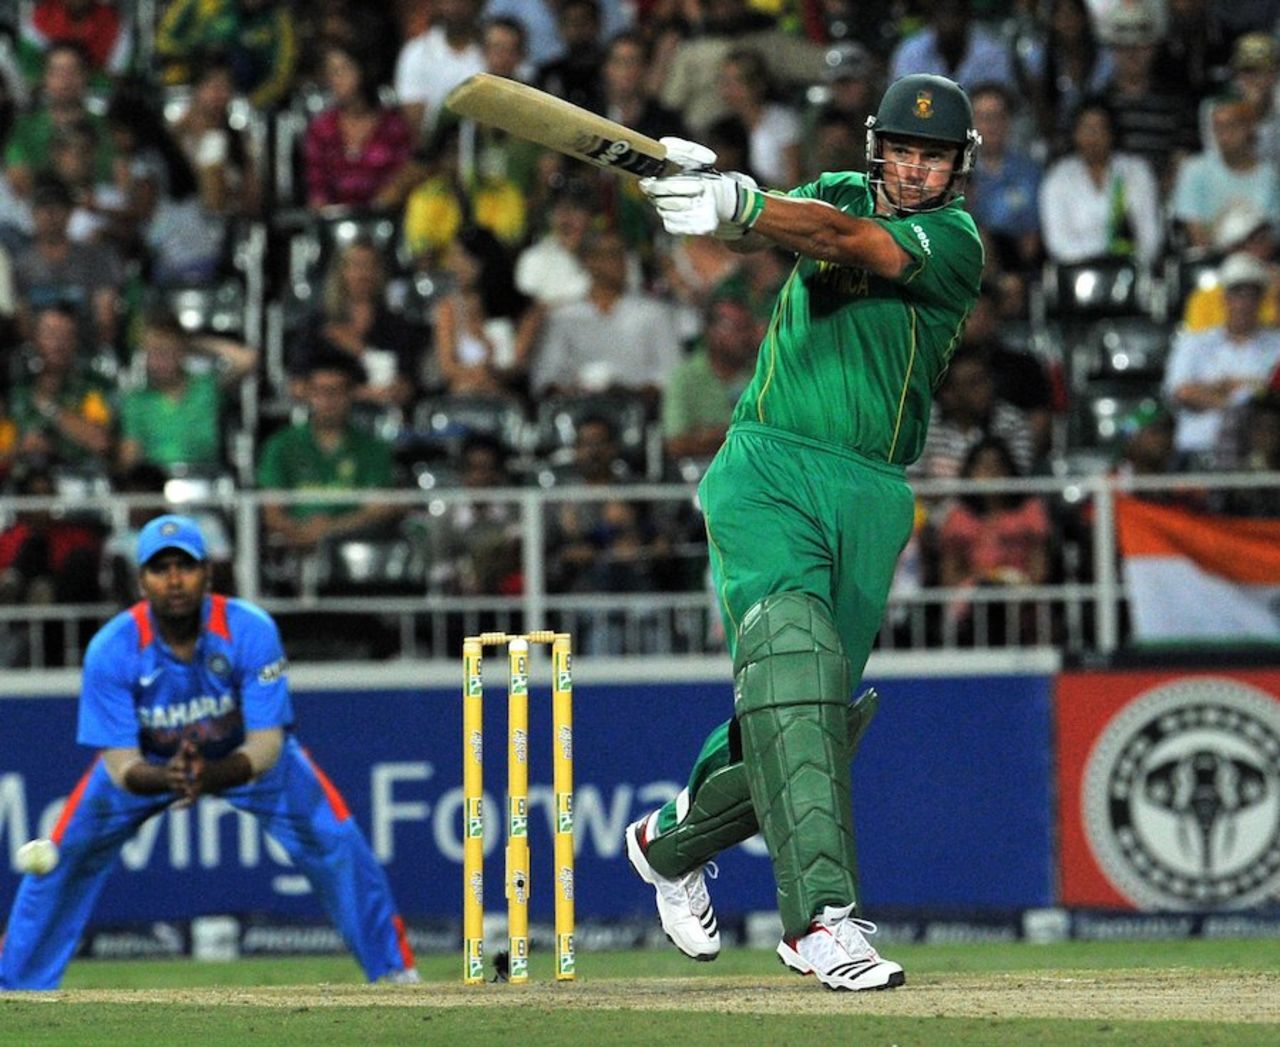 Graeme Smith pulls with power, South Africa v India, 2nd ODI, Johannesburg, January 15, 2011